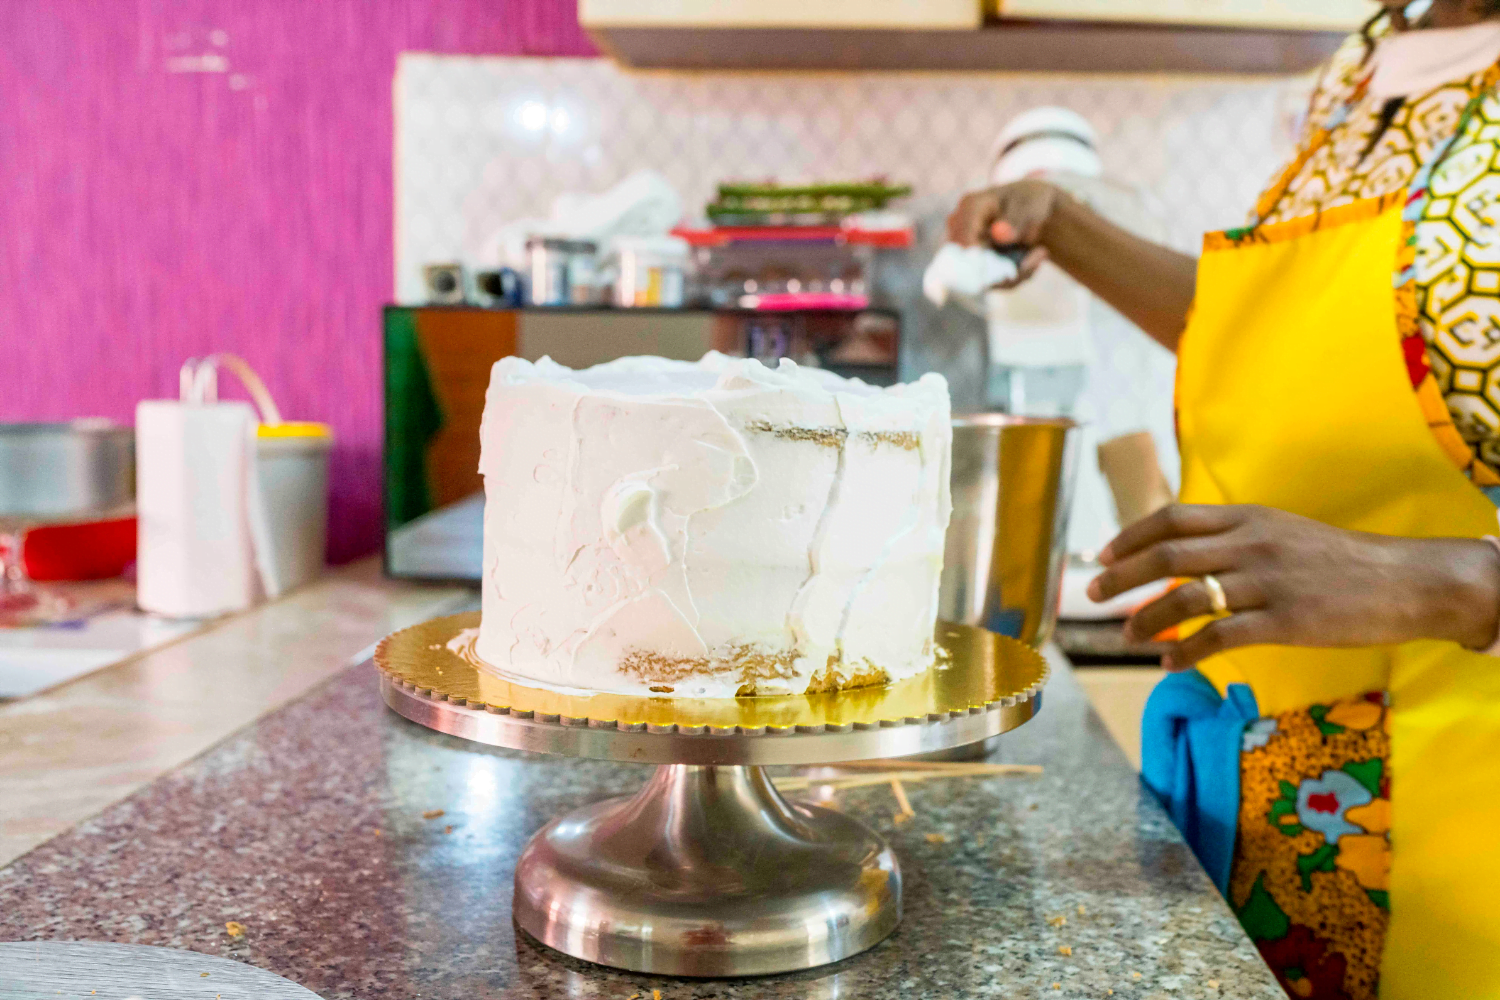 Esther Gathage, Owner of Herstees Bespoke Cakes, frosts a vanilla cake.